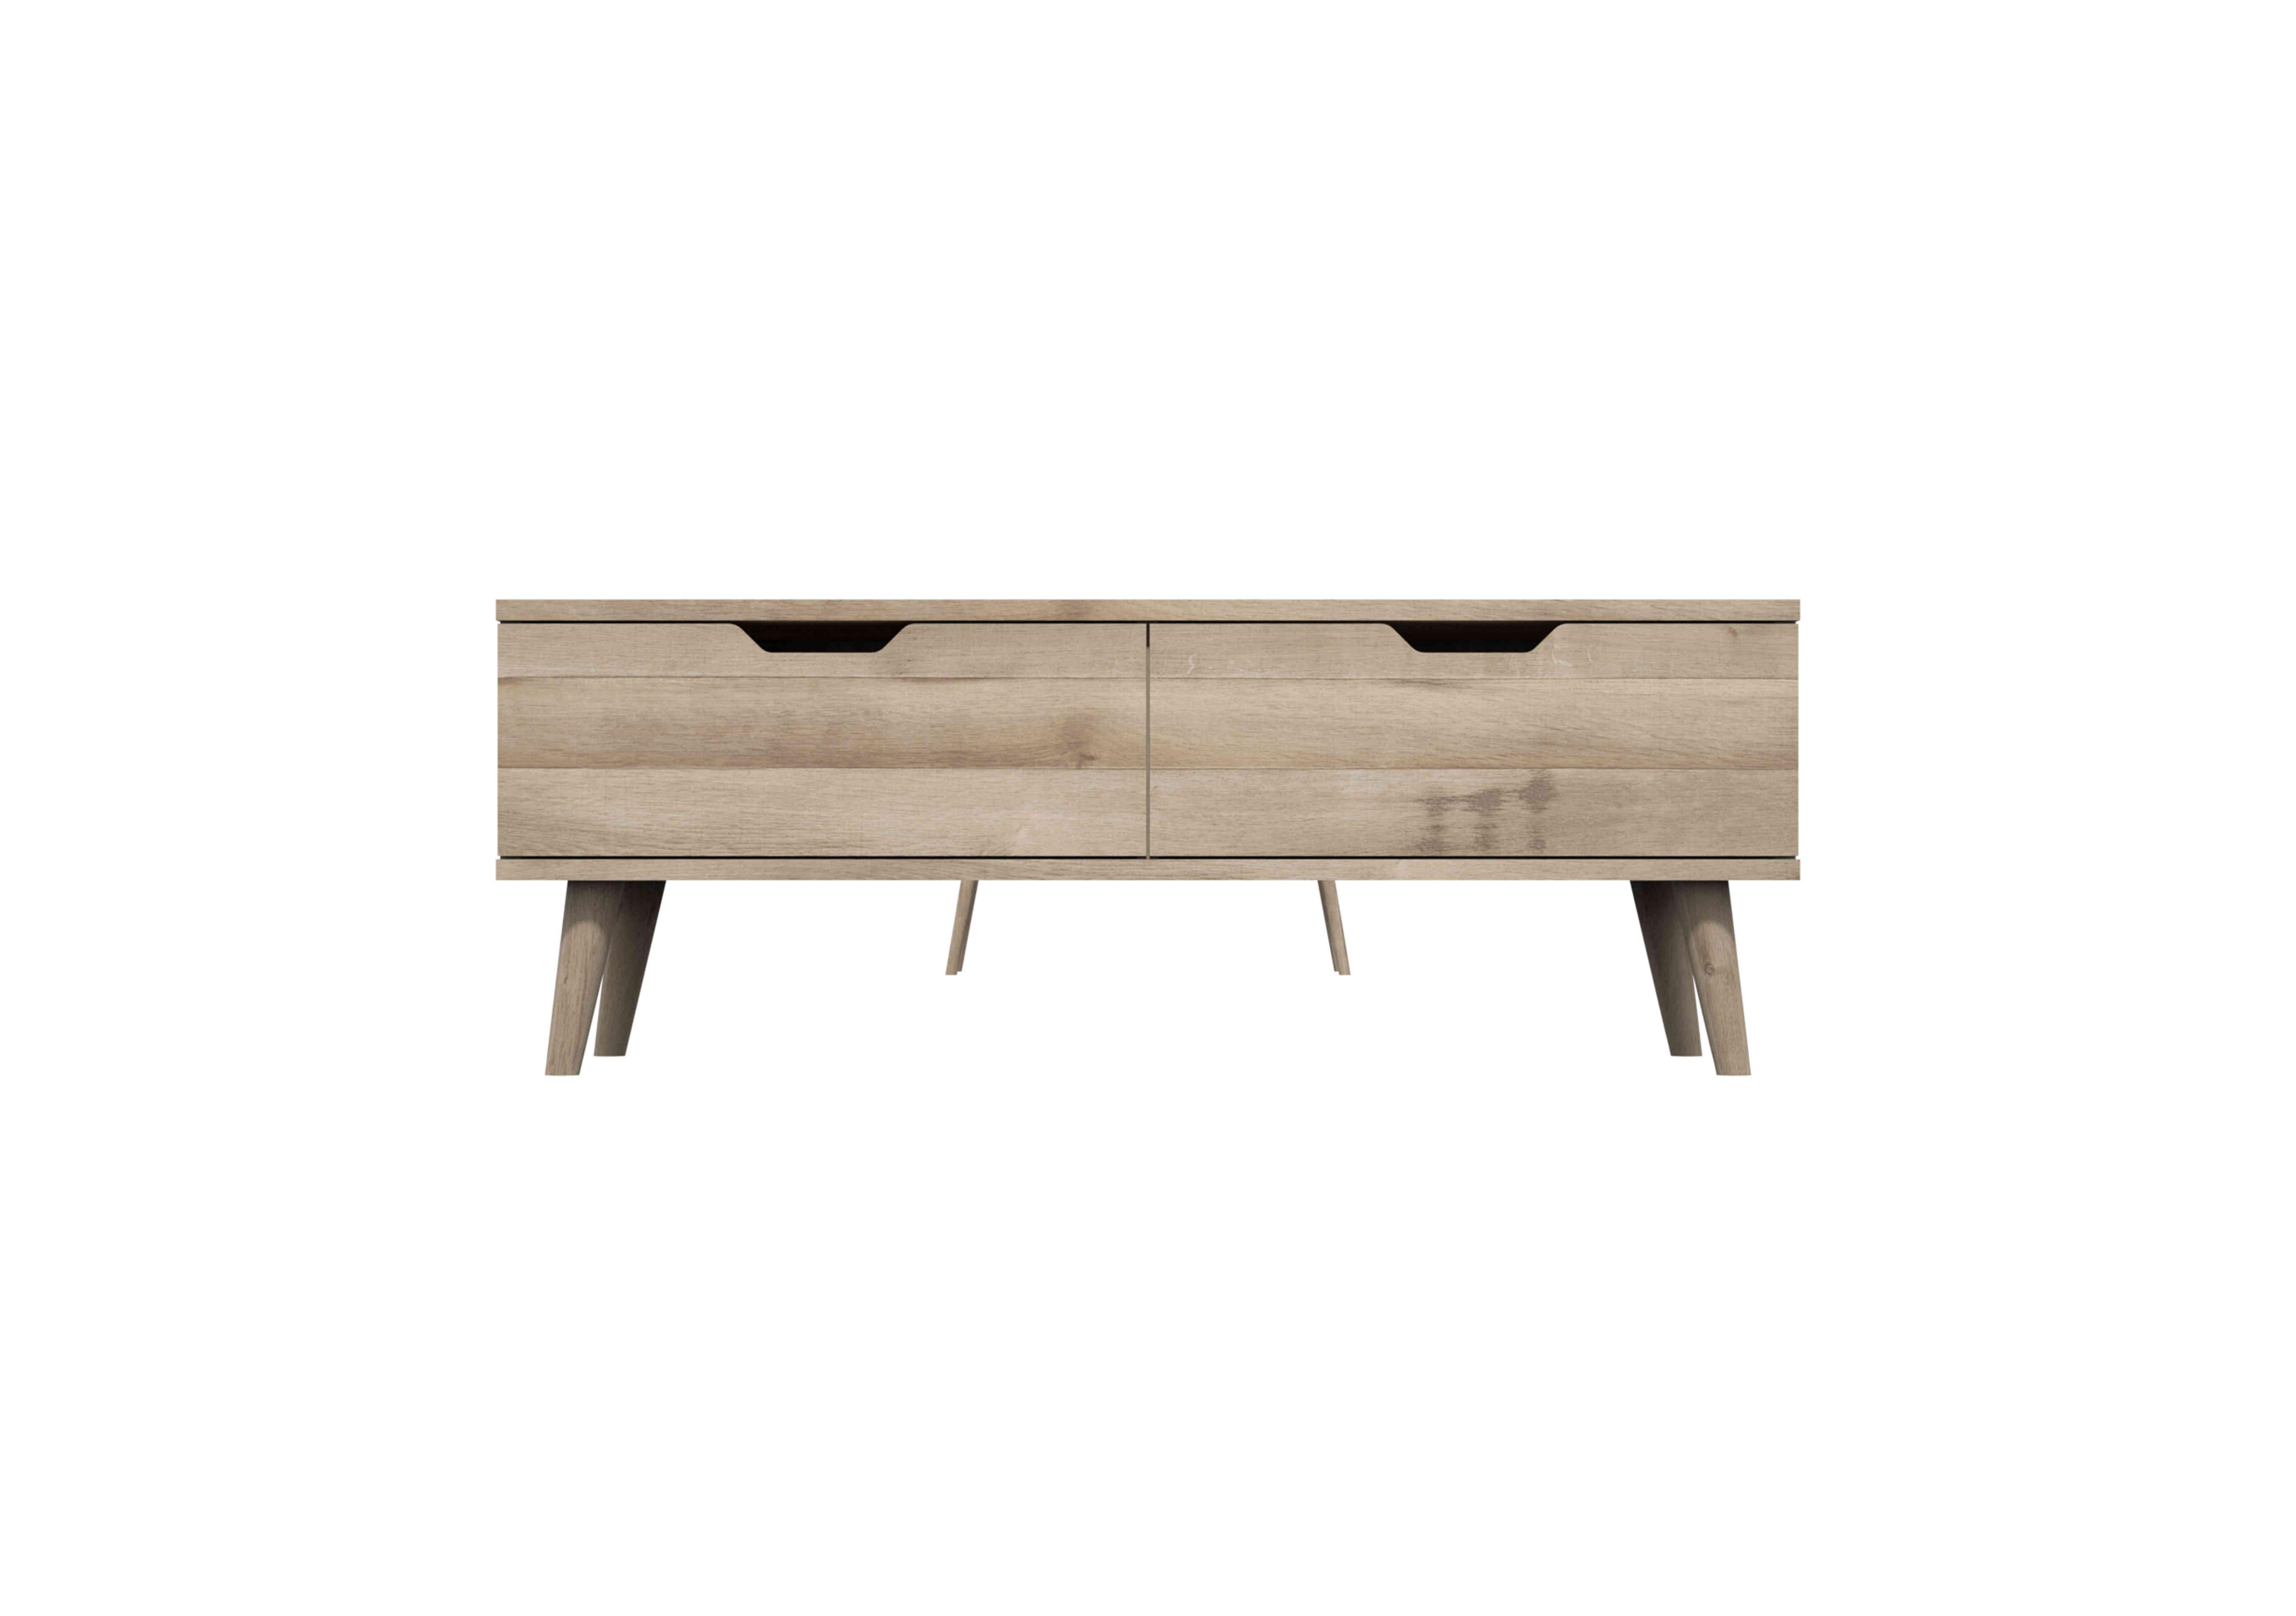 Finchley Coffee Table in Italian Natural Oak on Furniture Village